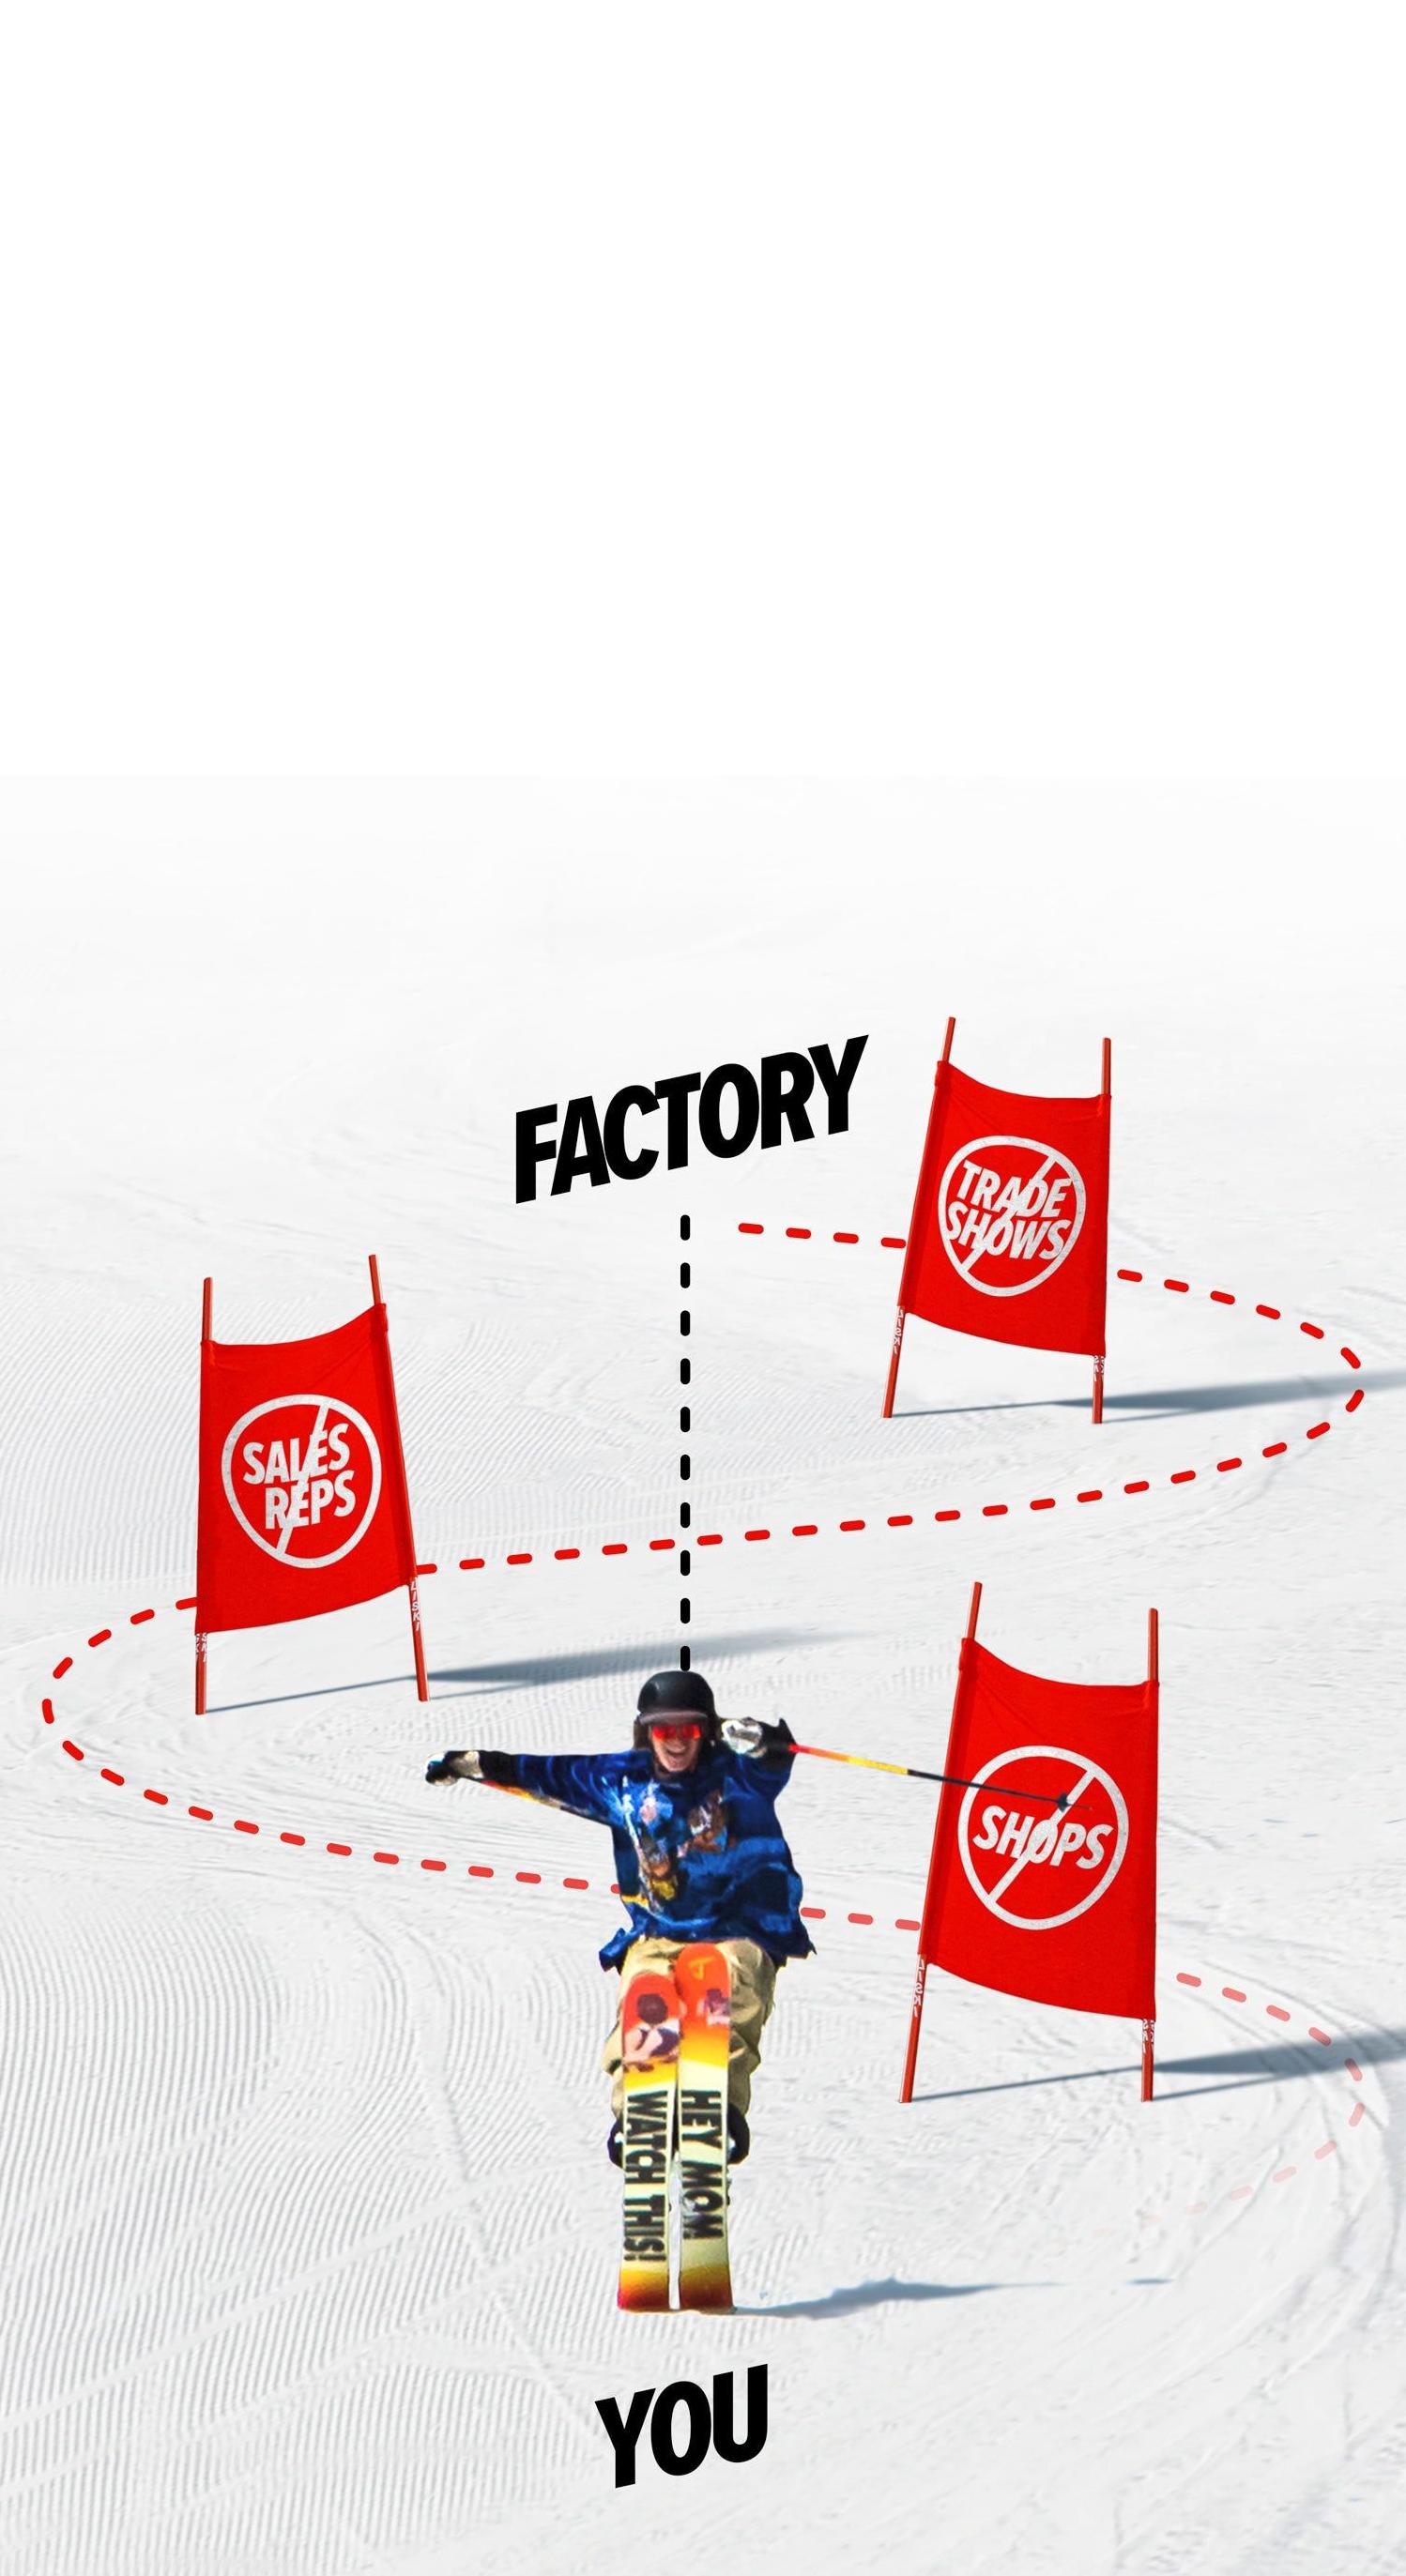 Factory Direct skis from jskis